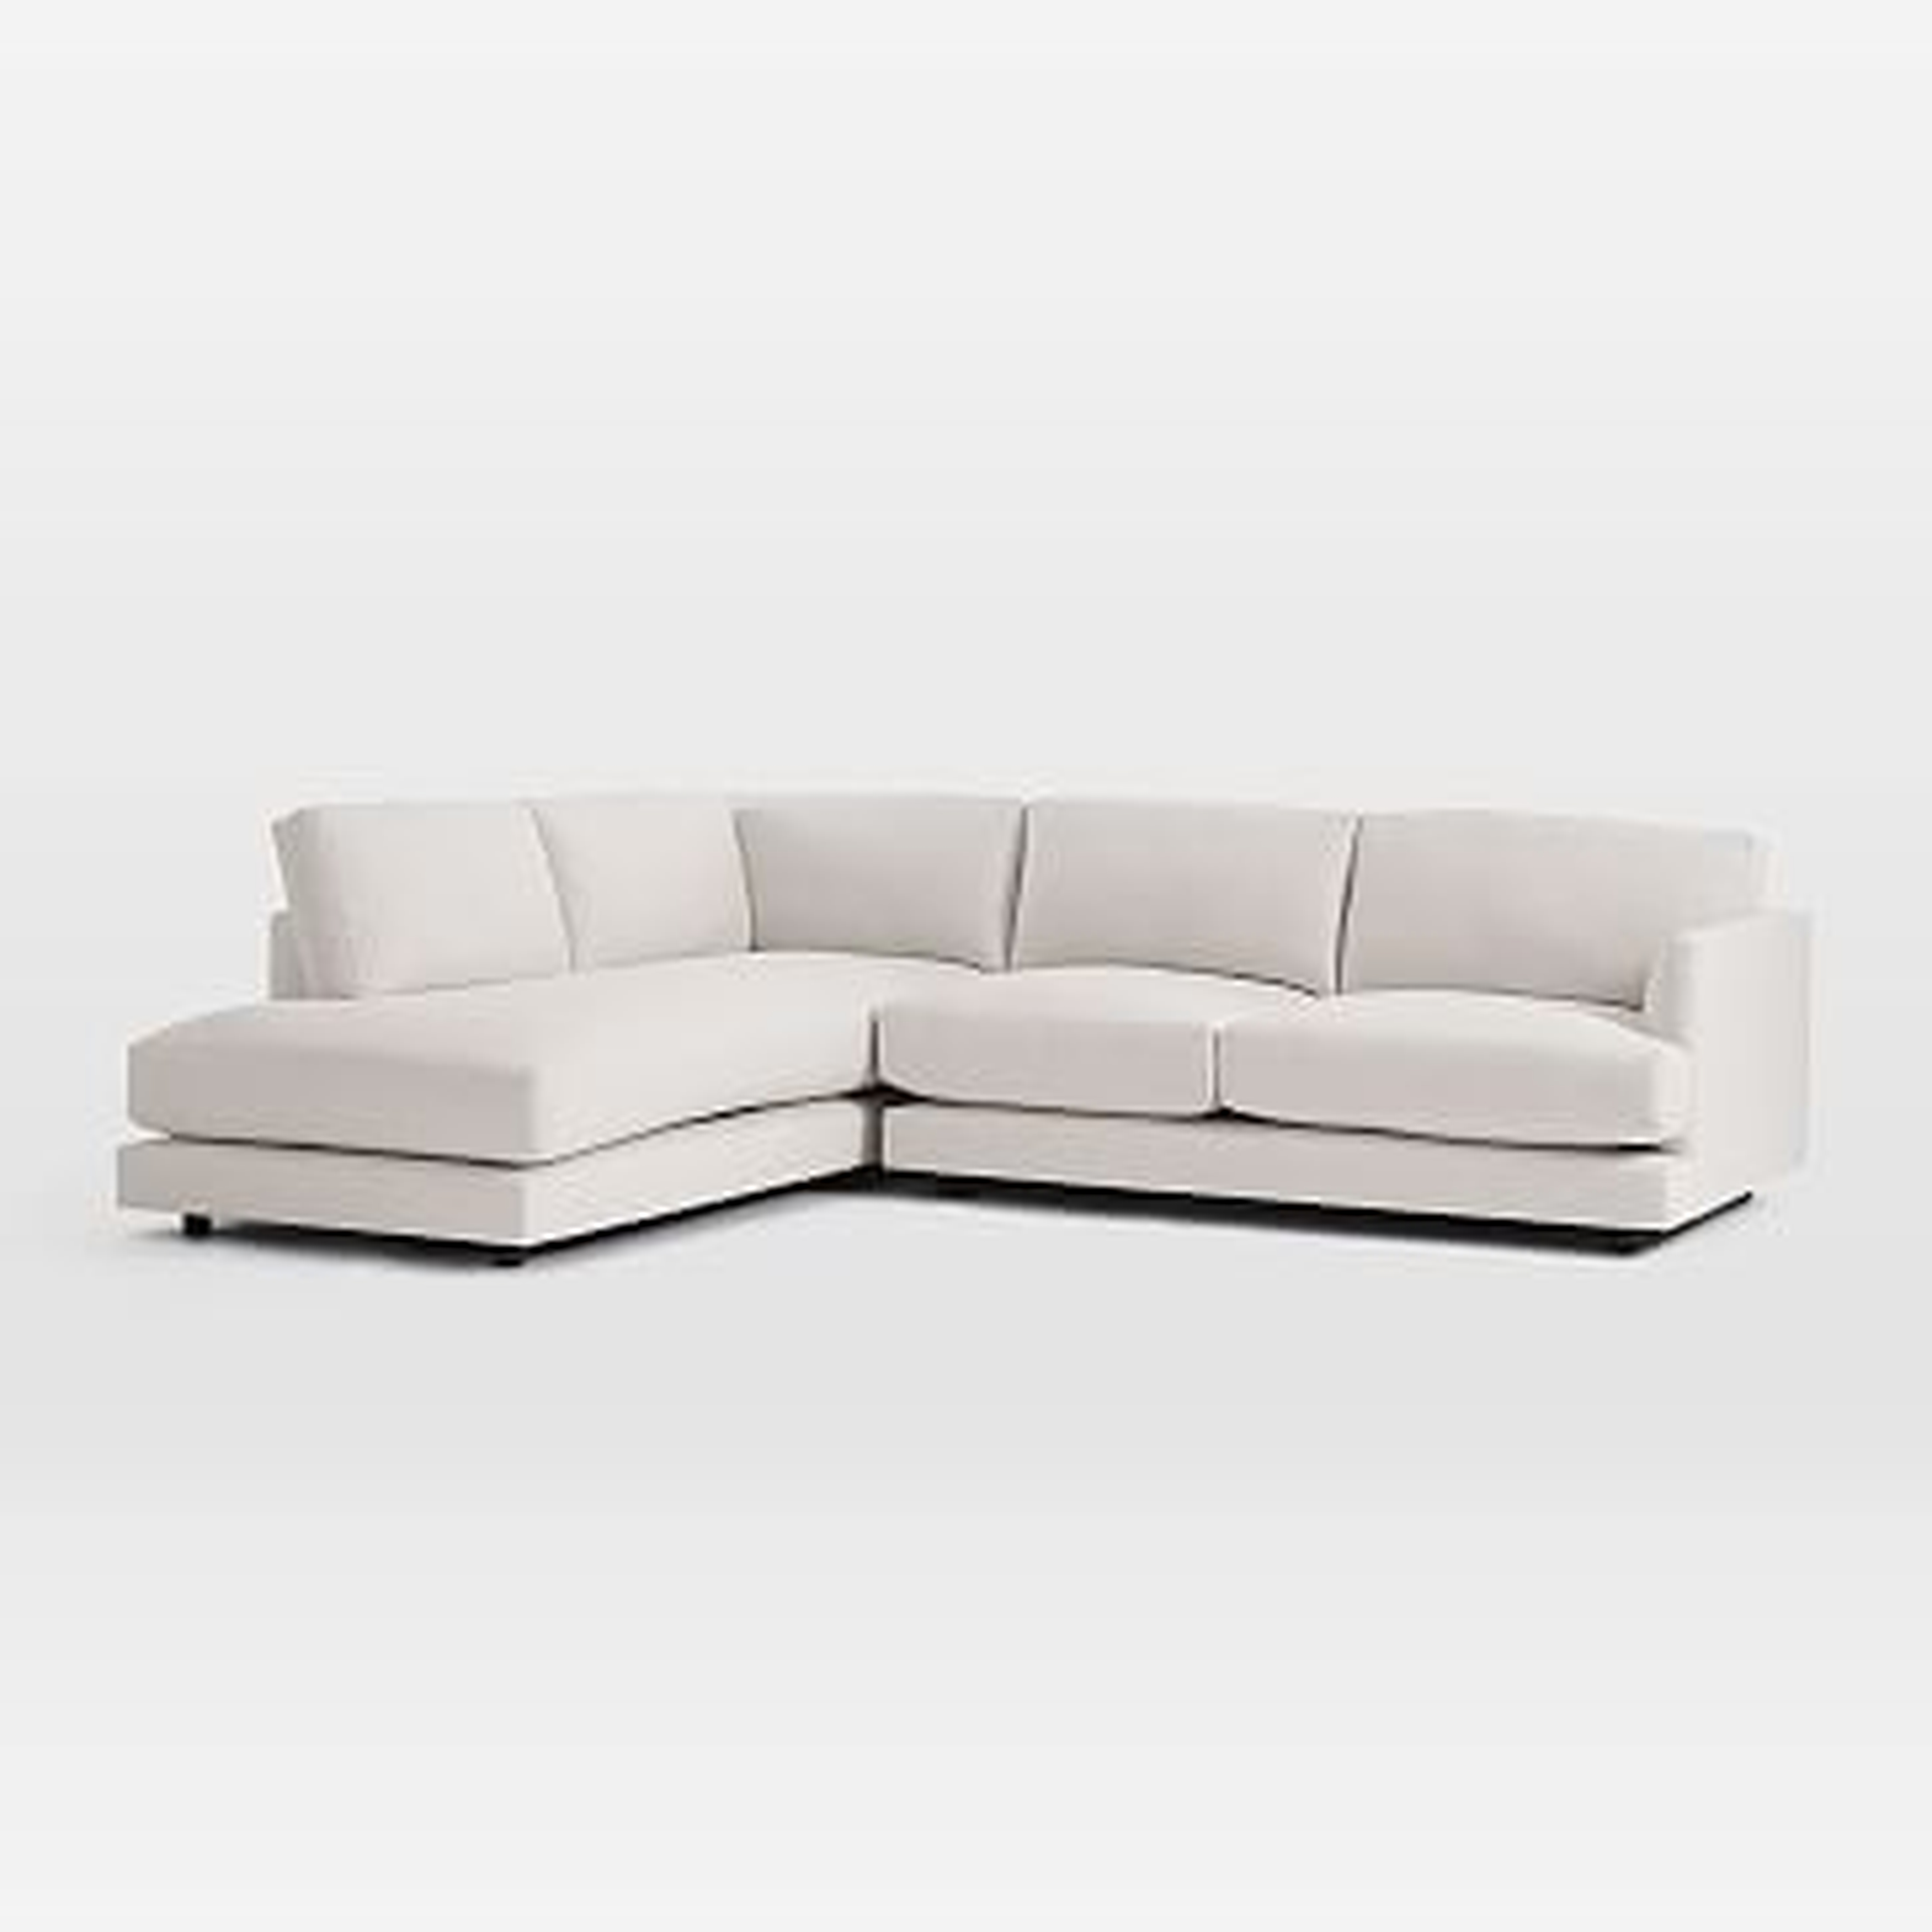 Haven Sectional Set 02: Right Arm Sofa, Left Arm Terminal Chaise, Oyster, Eco Weave - West Elm